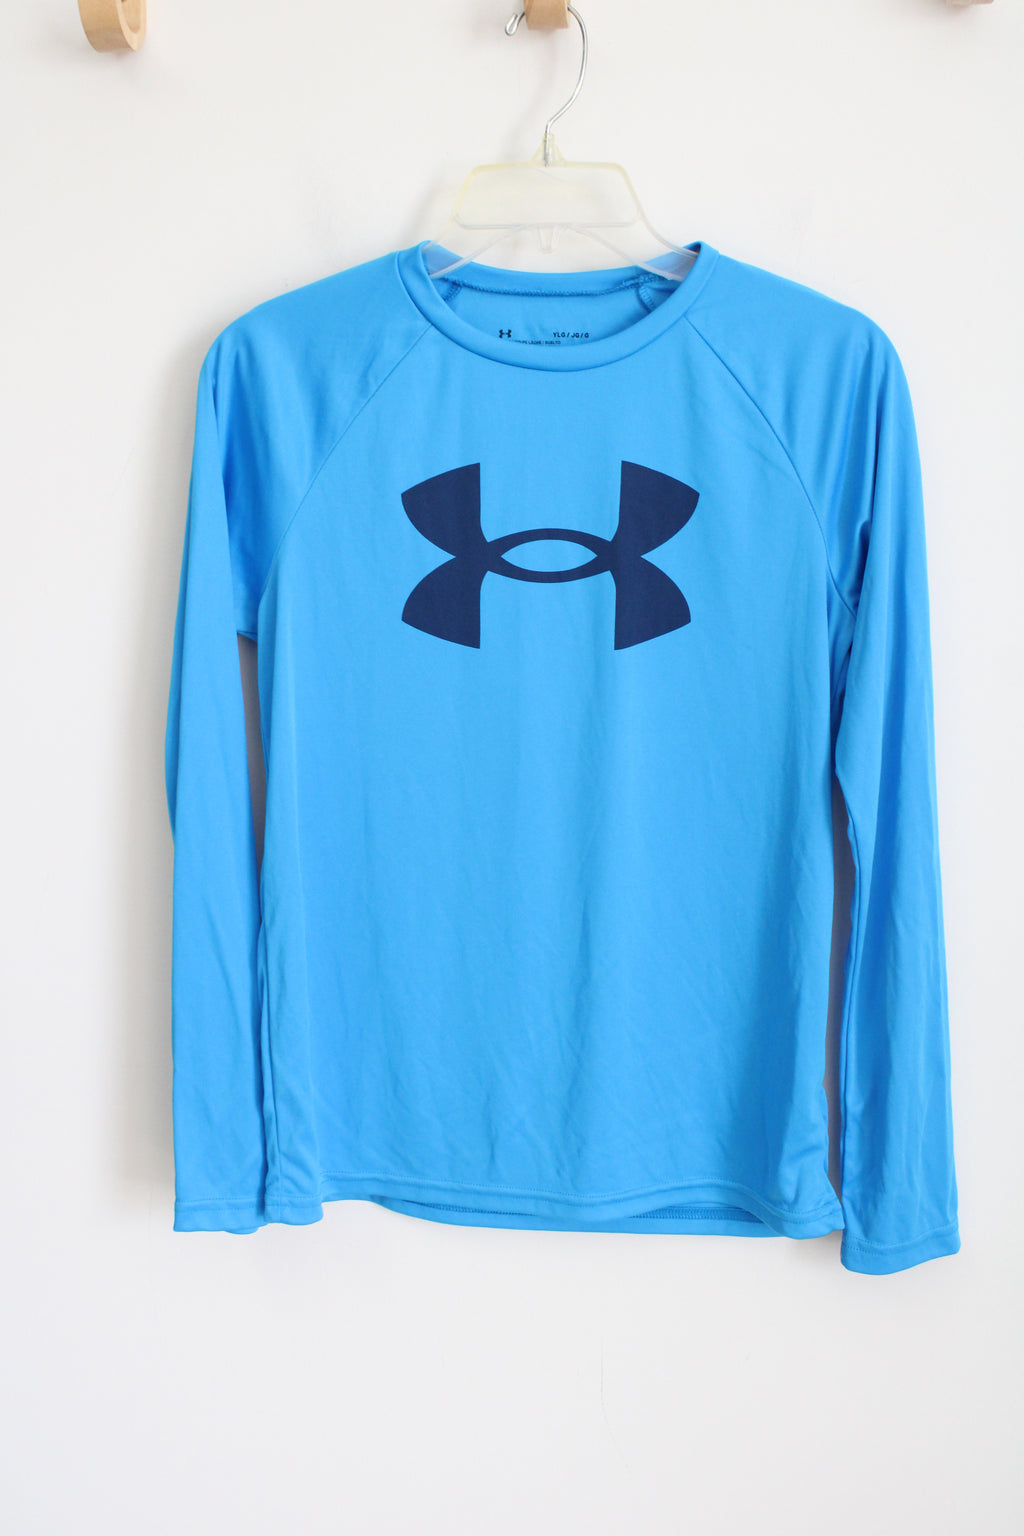 Under Armour Blue Loose Fit Long Sleeve Top | L